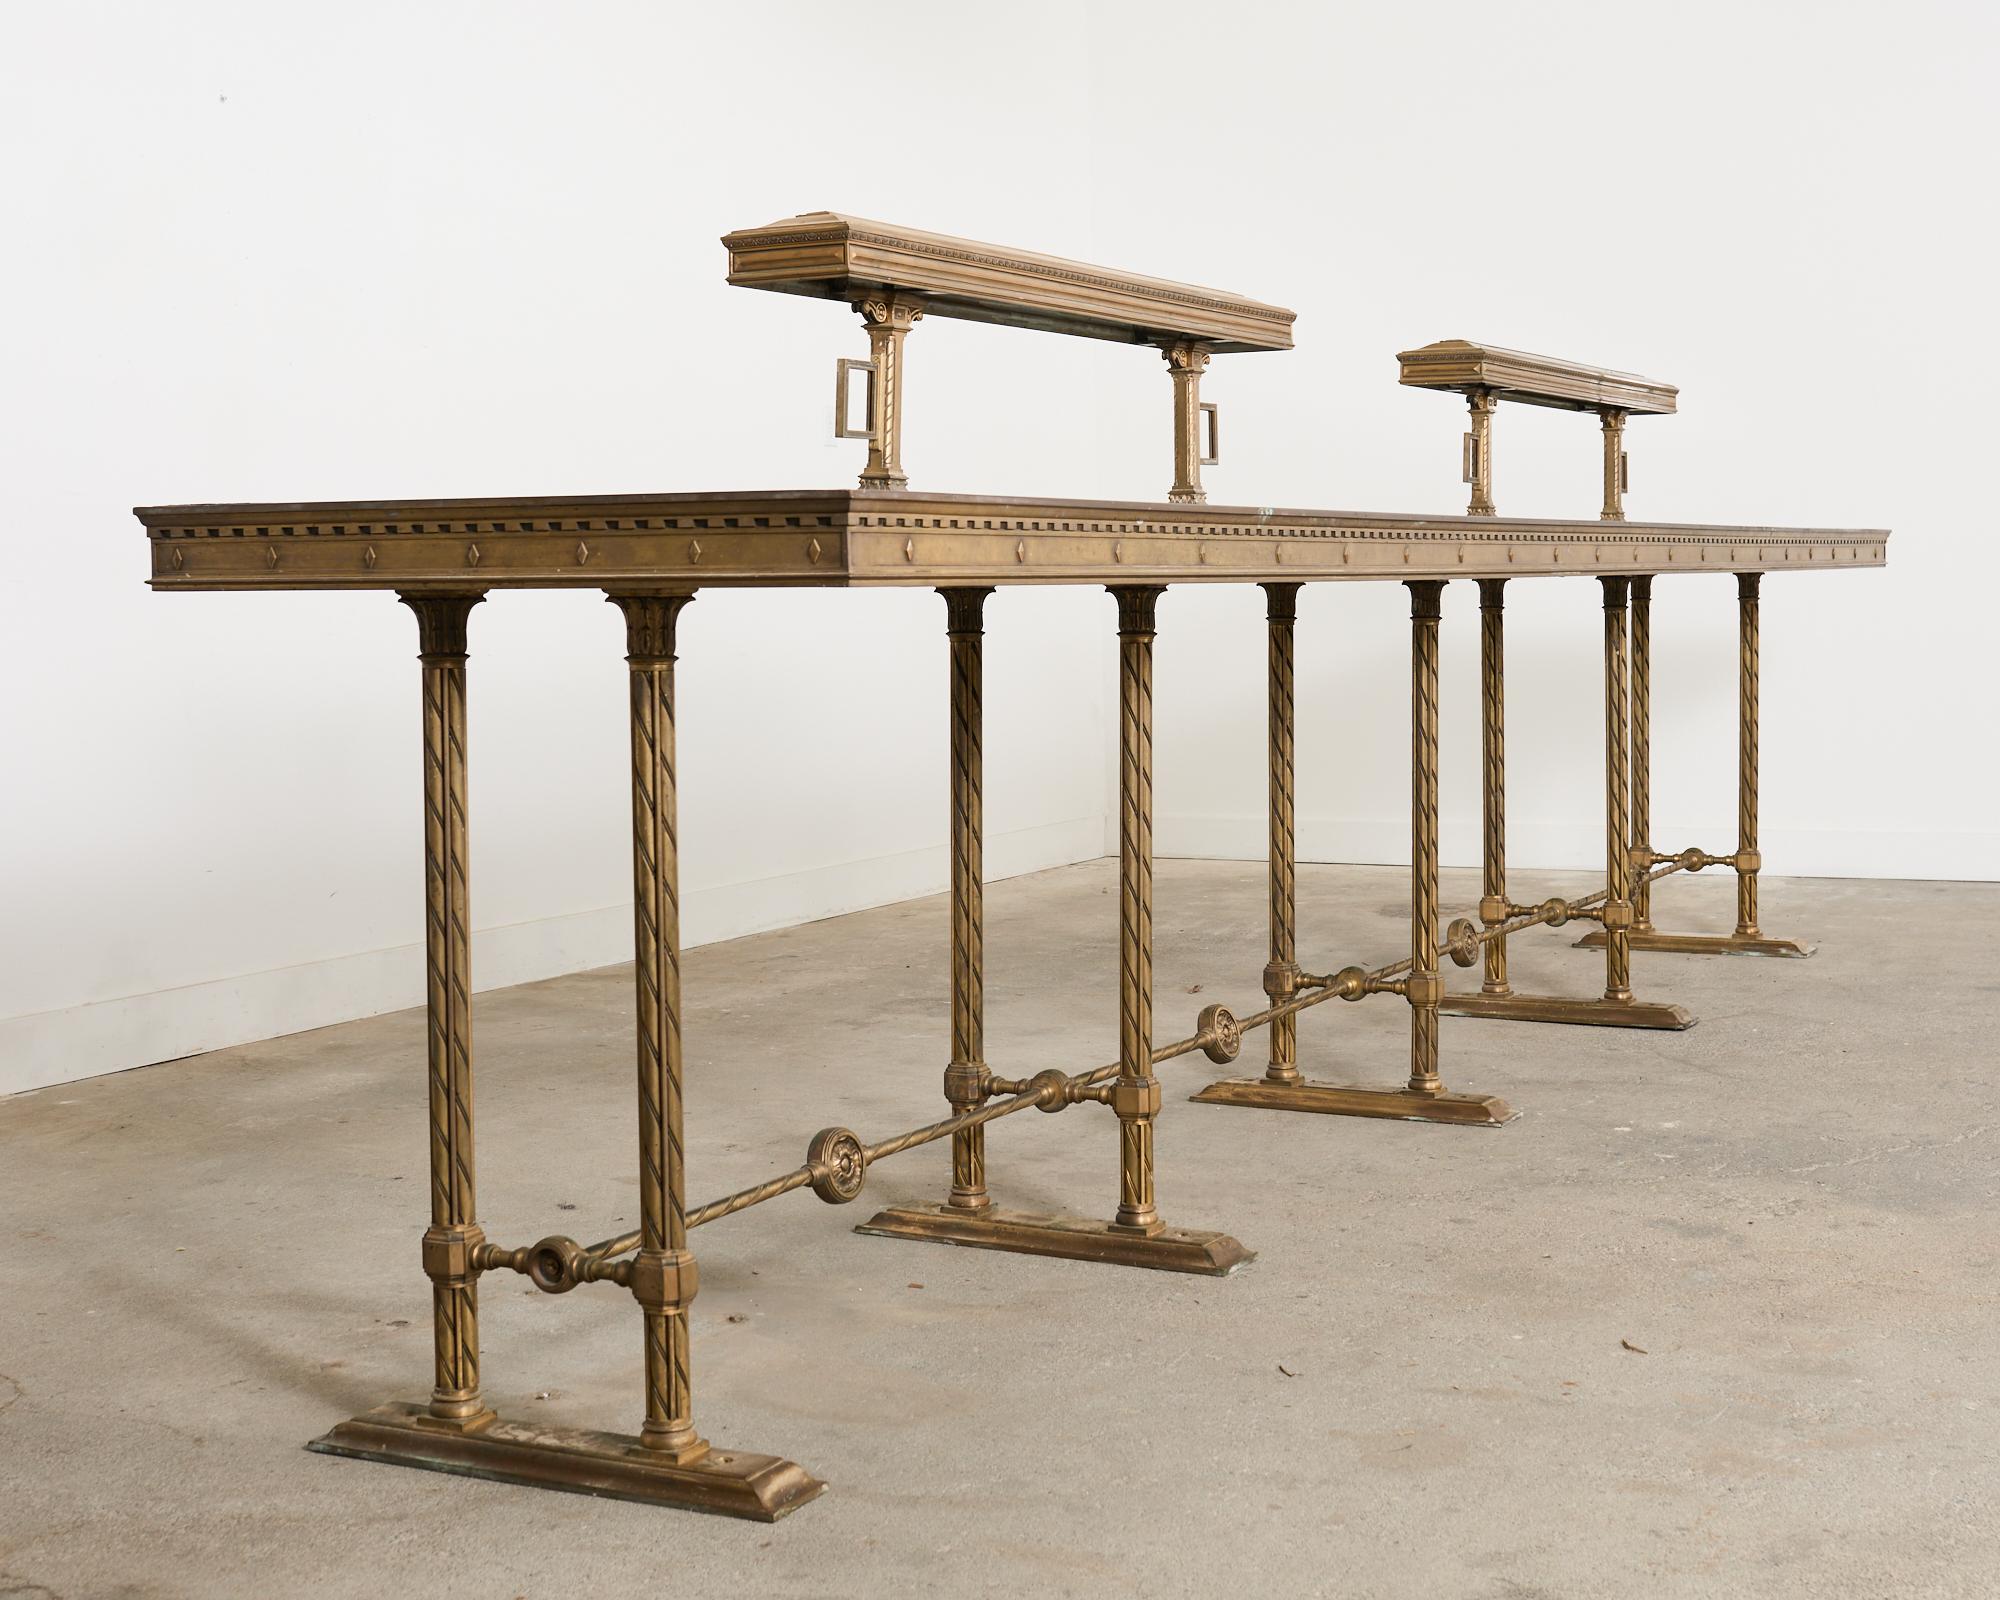 Monumental industrial bronze bar height counter measuring nearly 16 feet long. The bar height table crafted in the neoclassical taste was formerly a bank lobby counter with two sets of lights running down the middle. Incredibly heavy and solid with